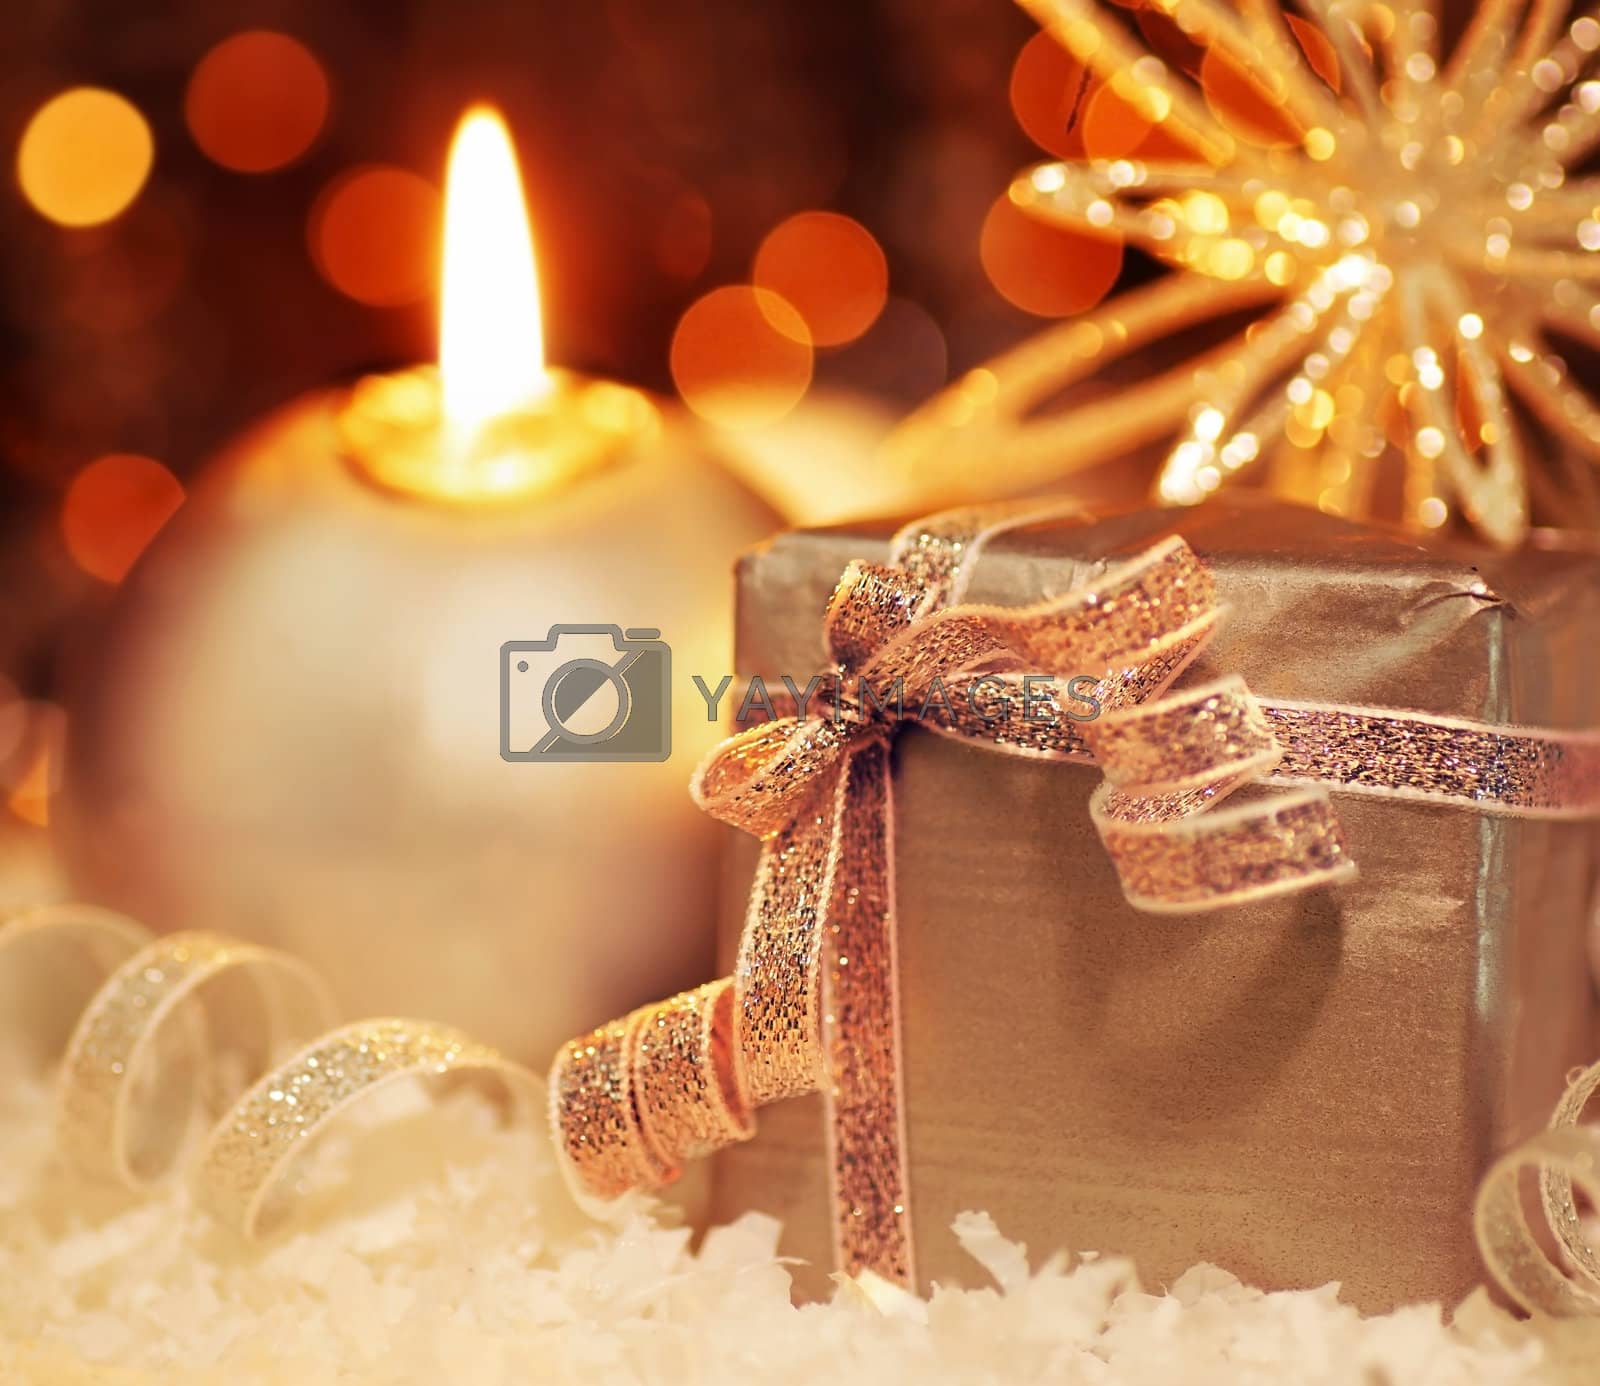 Royalty free image of Gift by Anna_Omelchenko